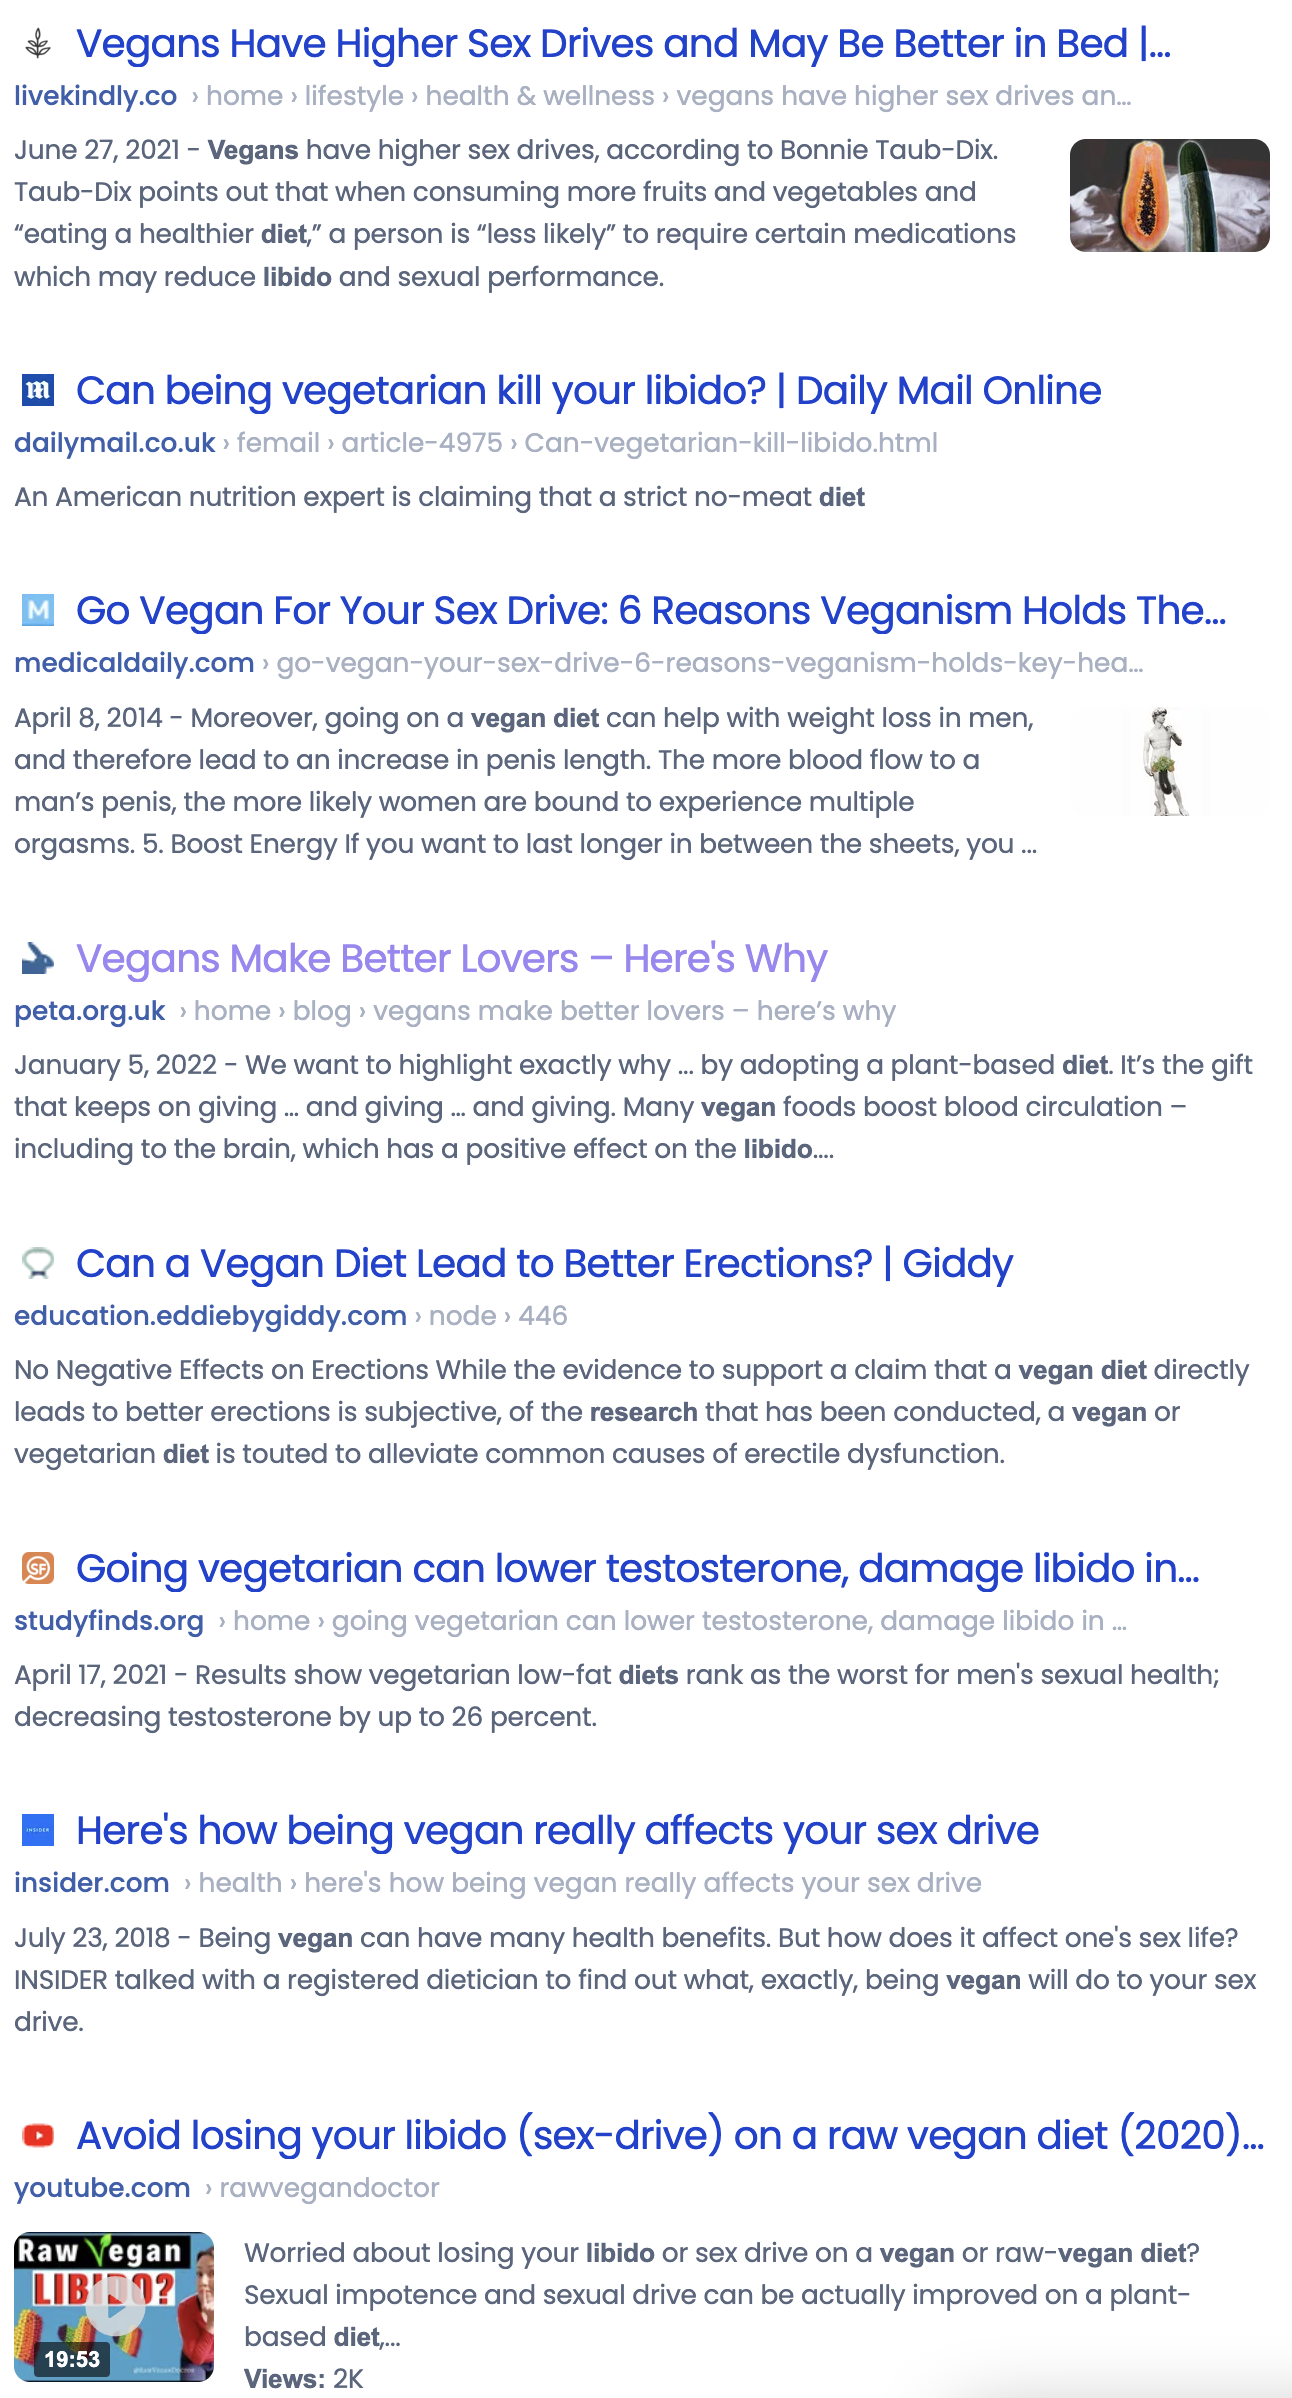 "Research vegan diet libido" search results on Brave browser